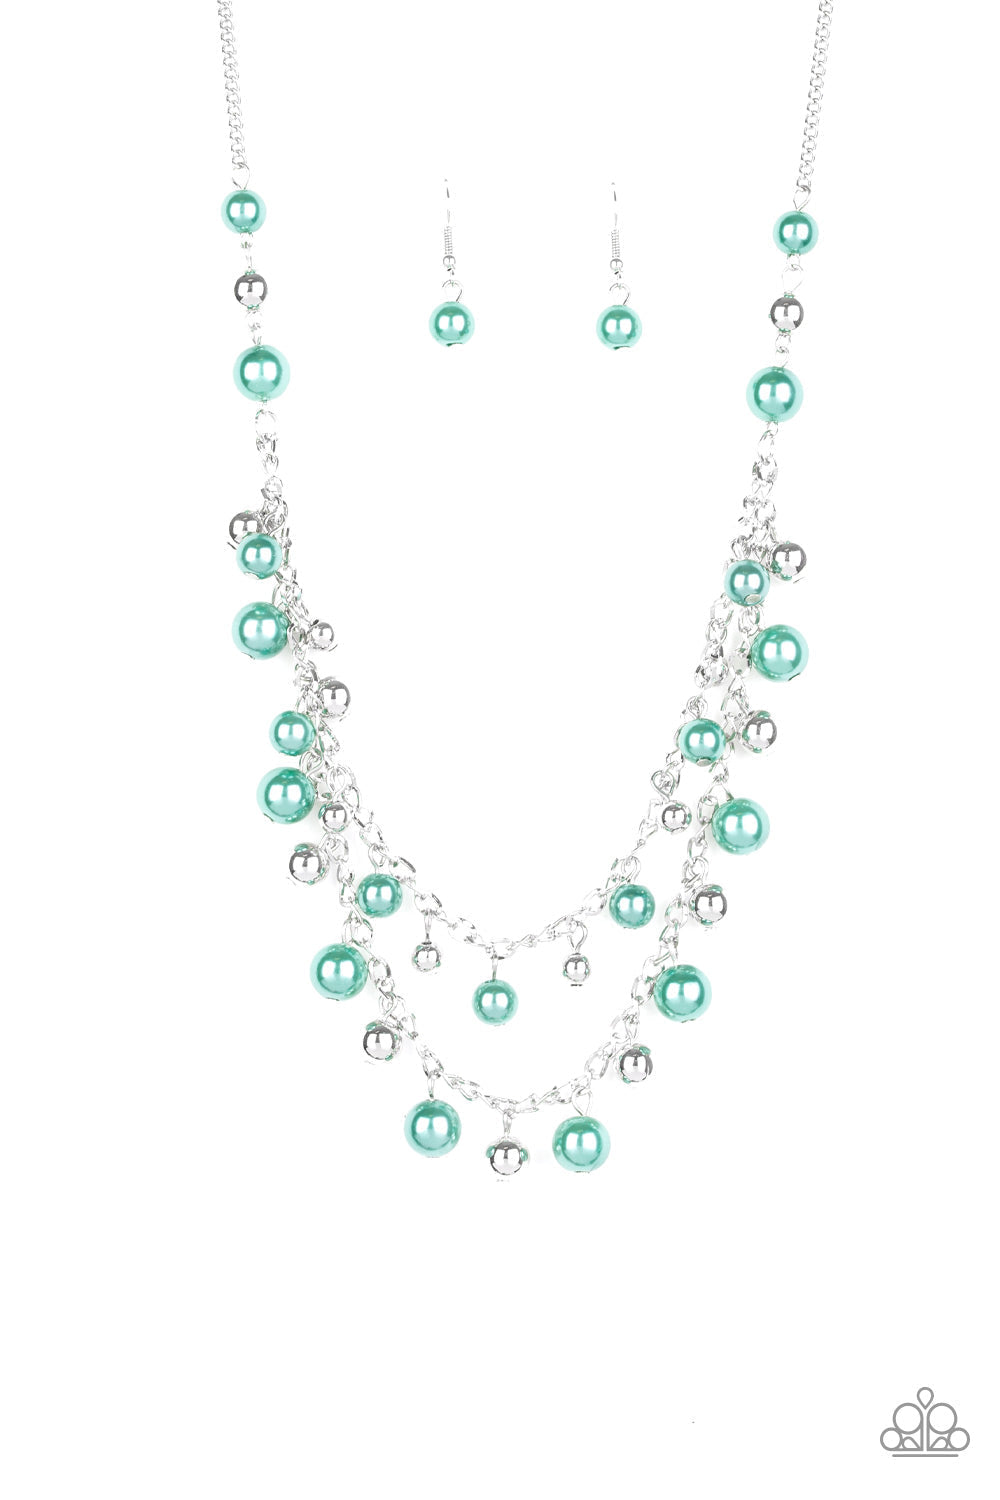 Fantastic Flair - Green and Silver Necklace - Paparazzi Accessories - A refined collection of glistening silver and pearly green beads swing from the bottom of shimmery silver chains, creating glamorous layers below the collar. Features an adjustable clasp closure.